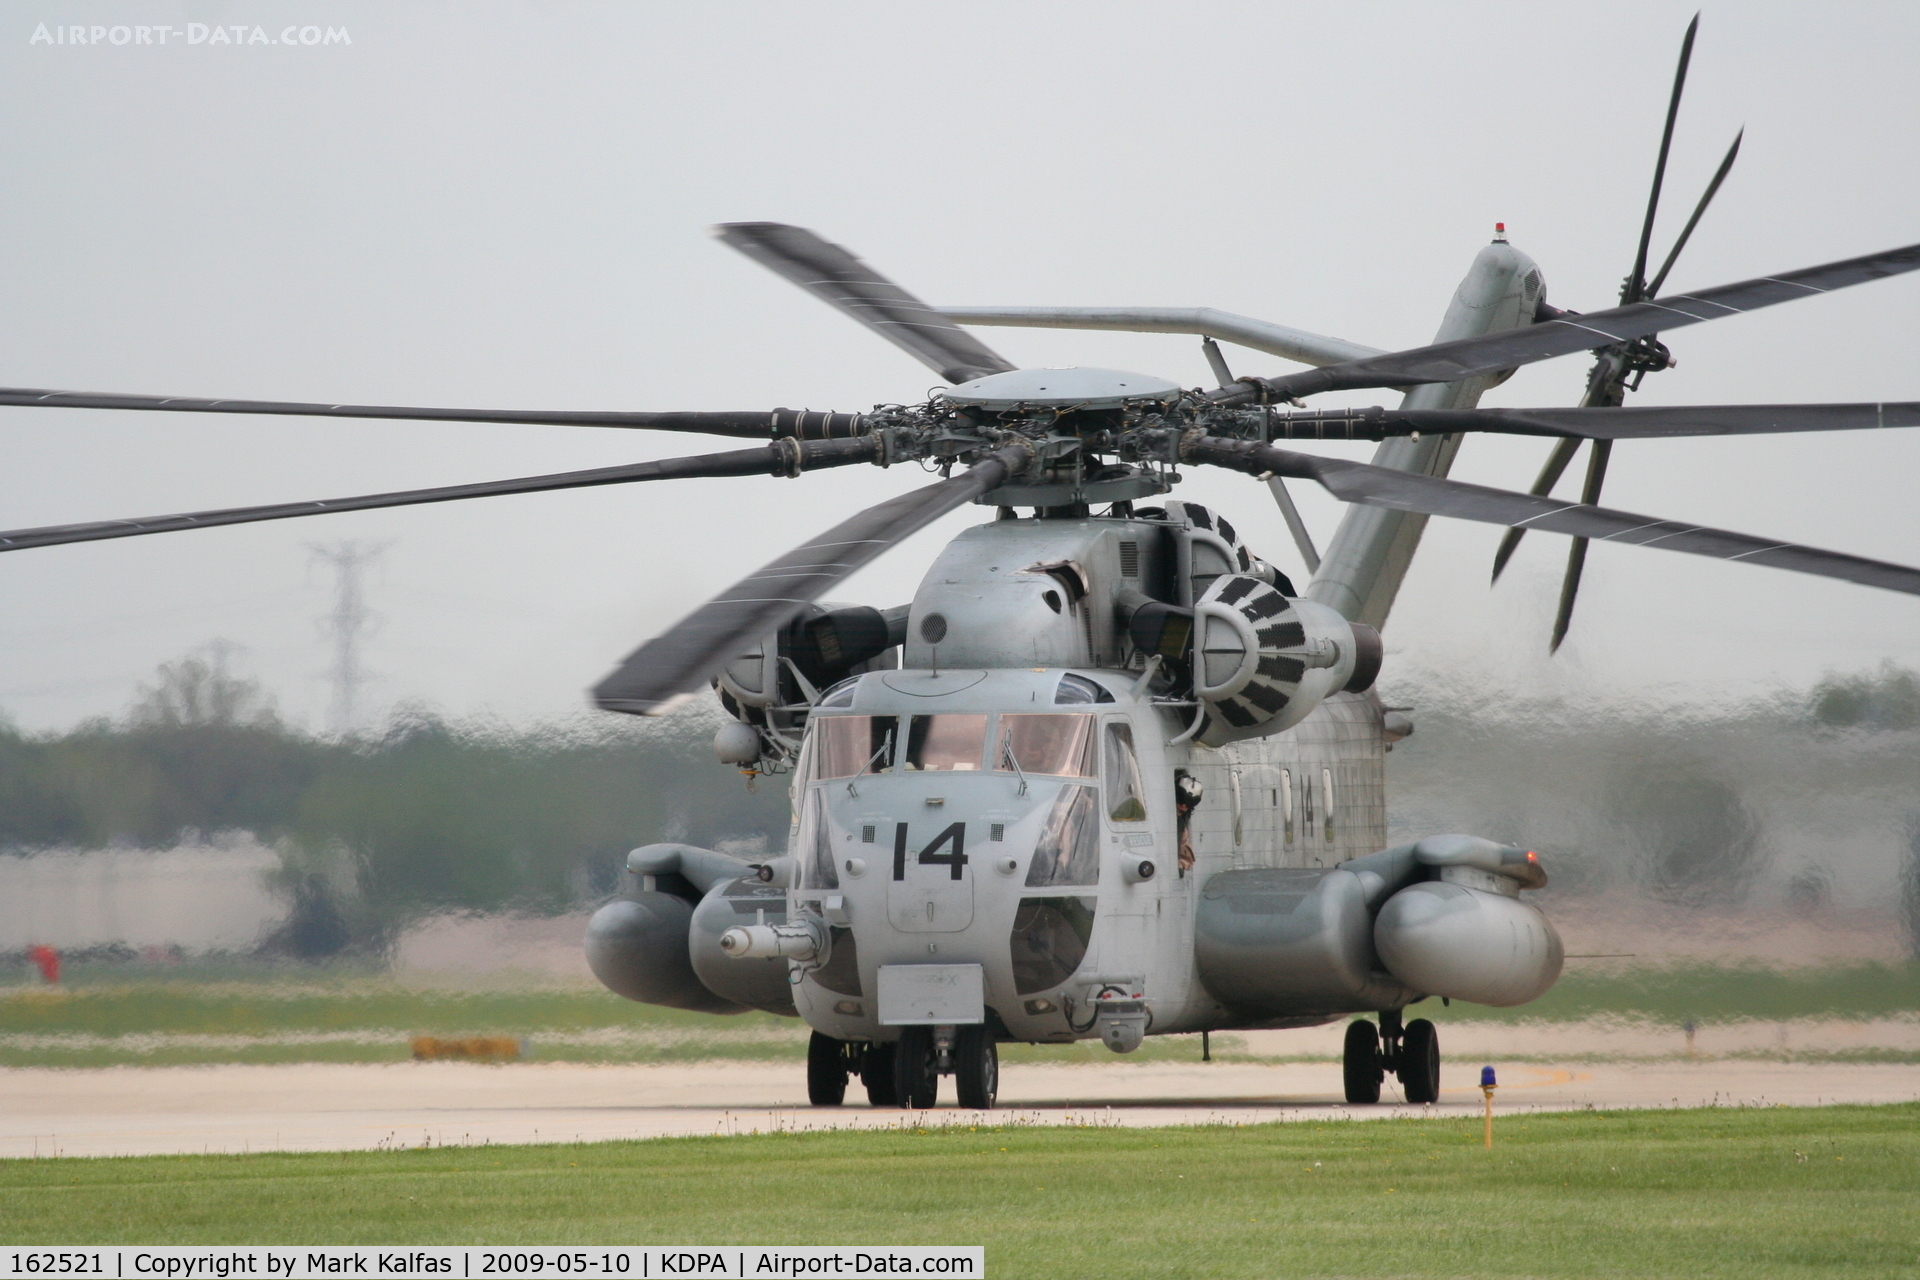 162521, Sikorsky CH-53E Super Stallion C/N 65-527, CH-53 Super Stallion, 162521/HMH-461 taxiing to the ramp at KDPA